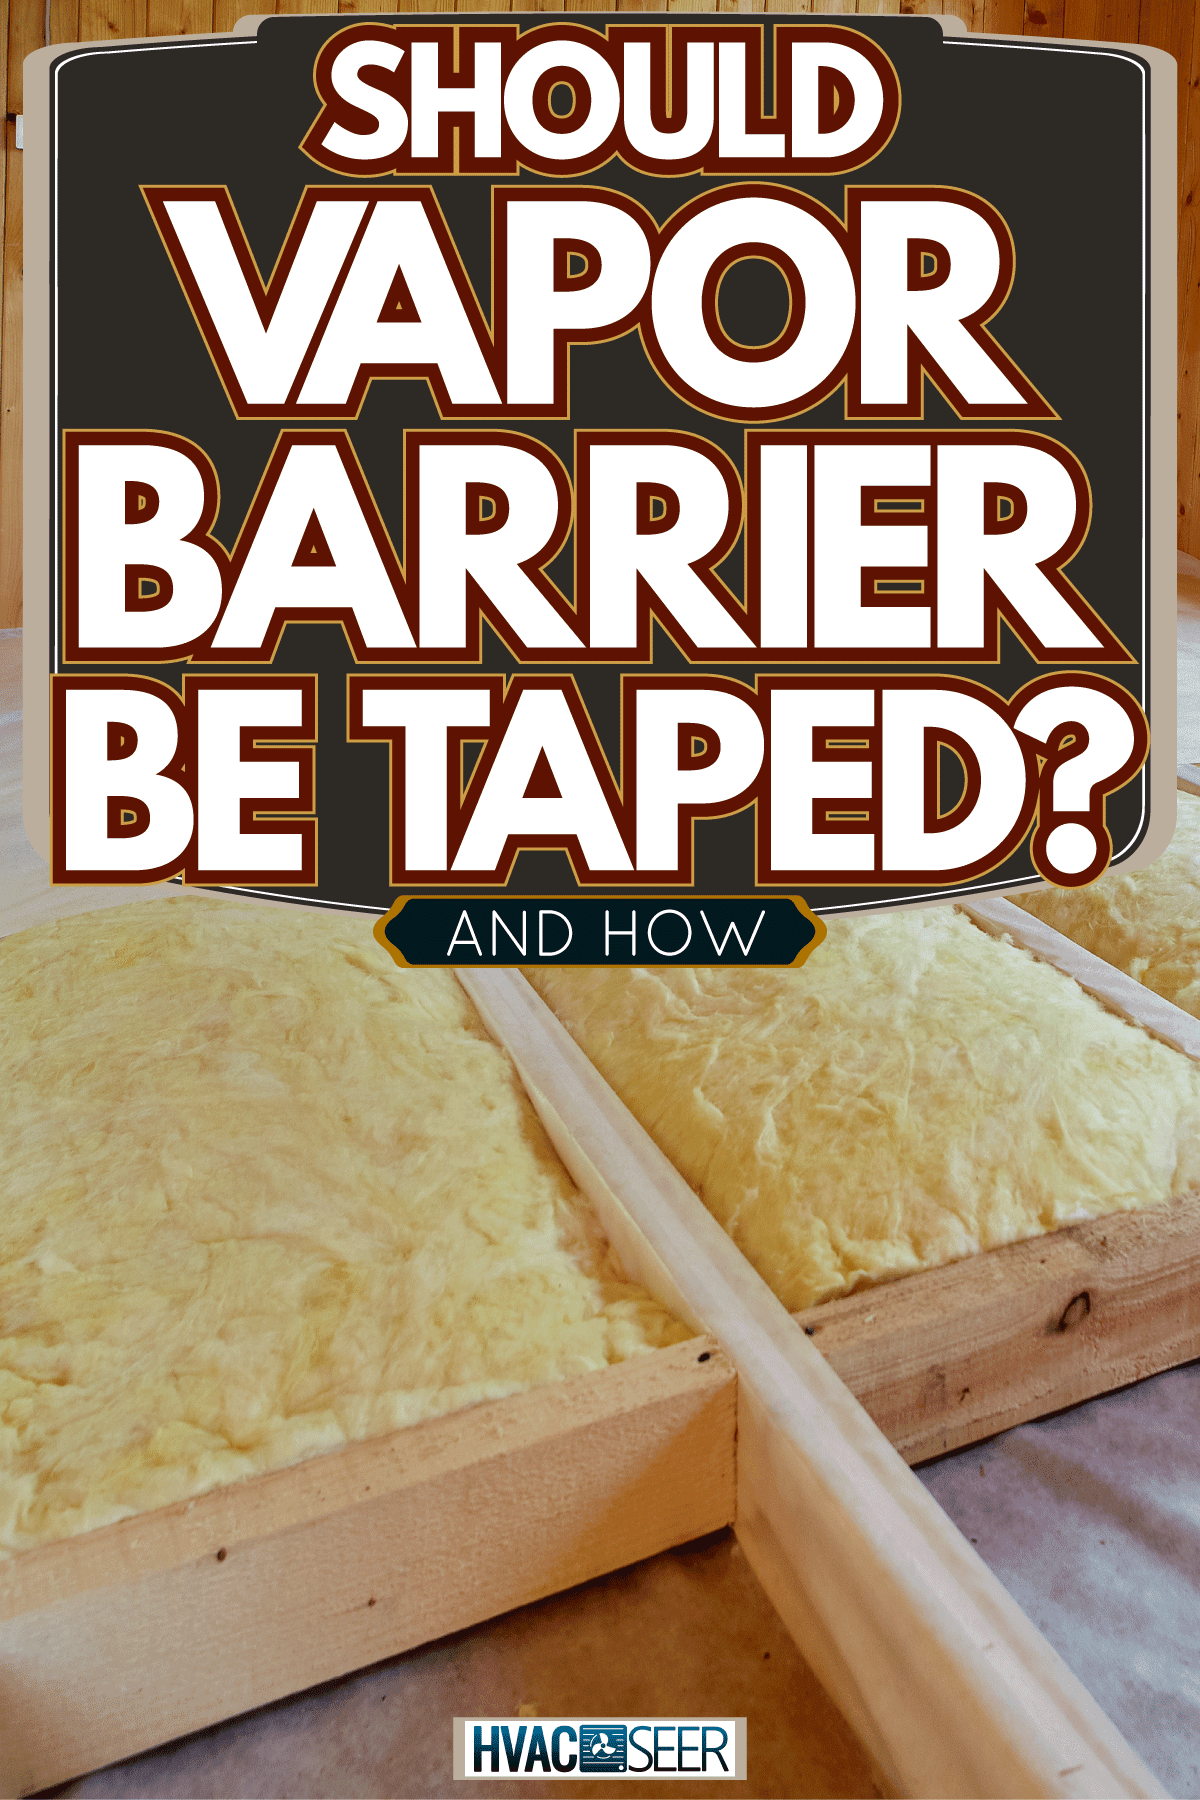 Covering mineral wool insulation inside a country home, Should Vapor Barrier Be Taped? [And How]